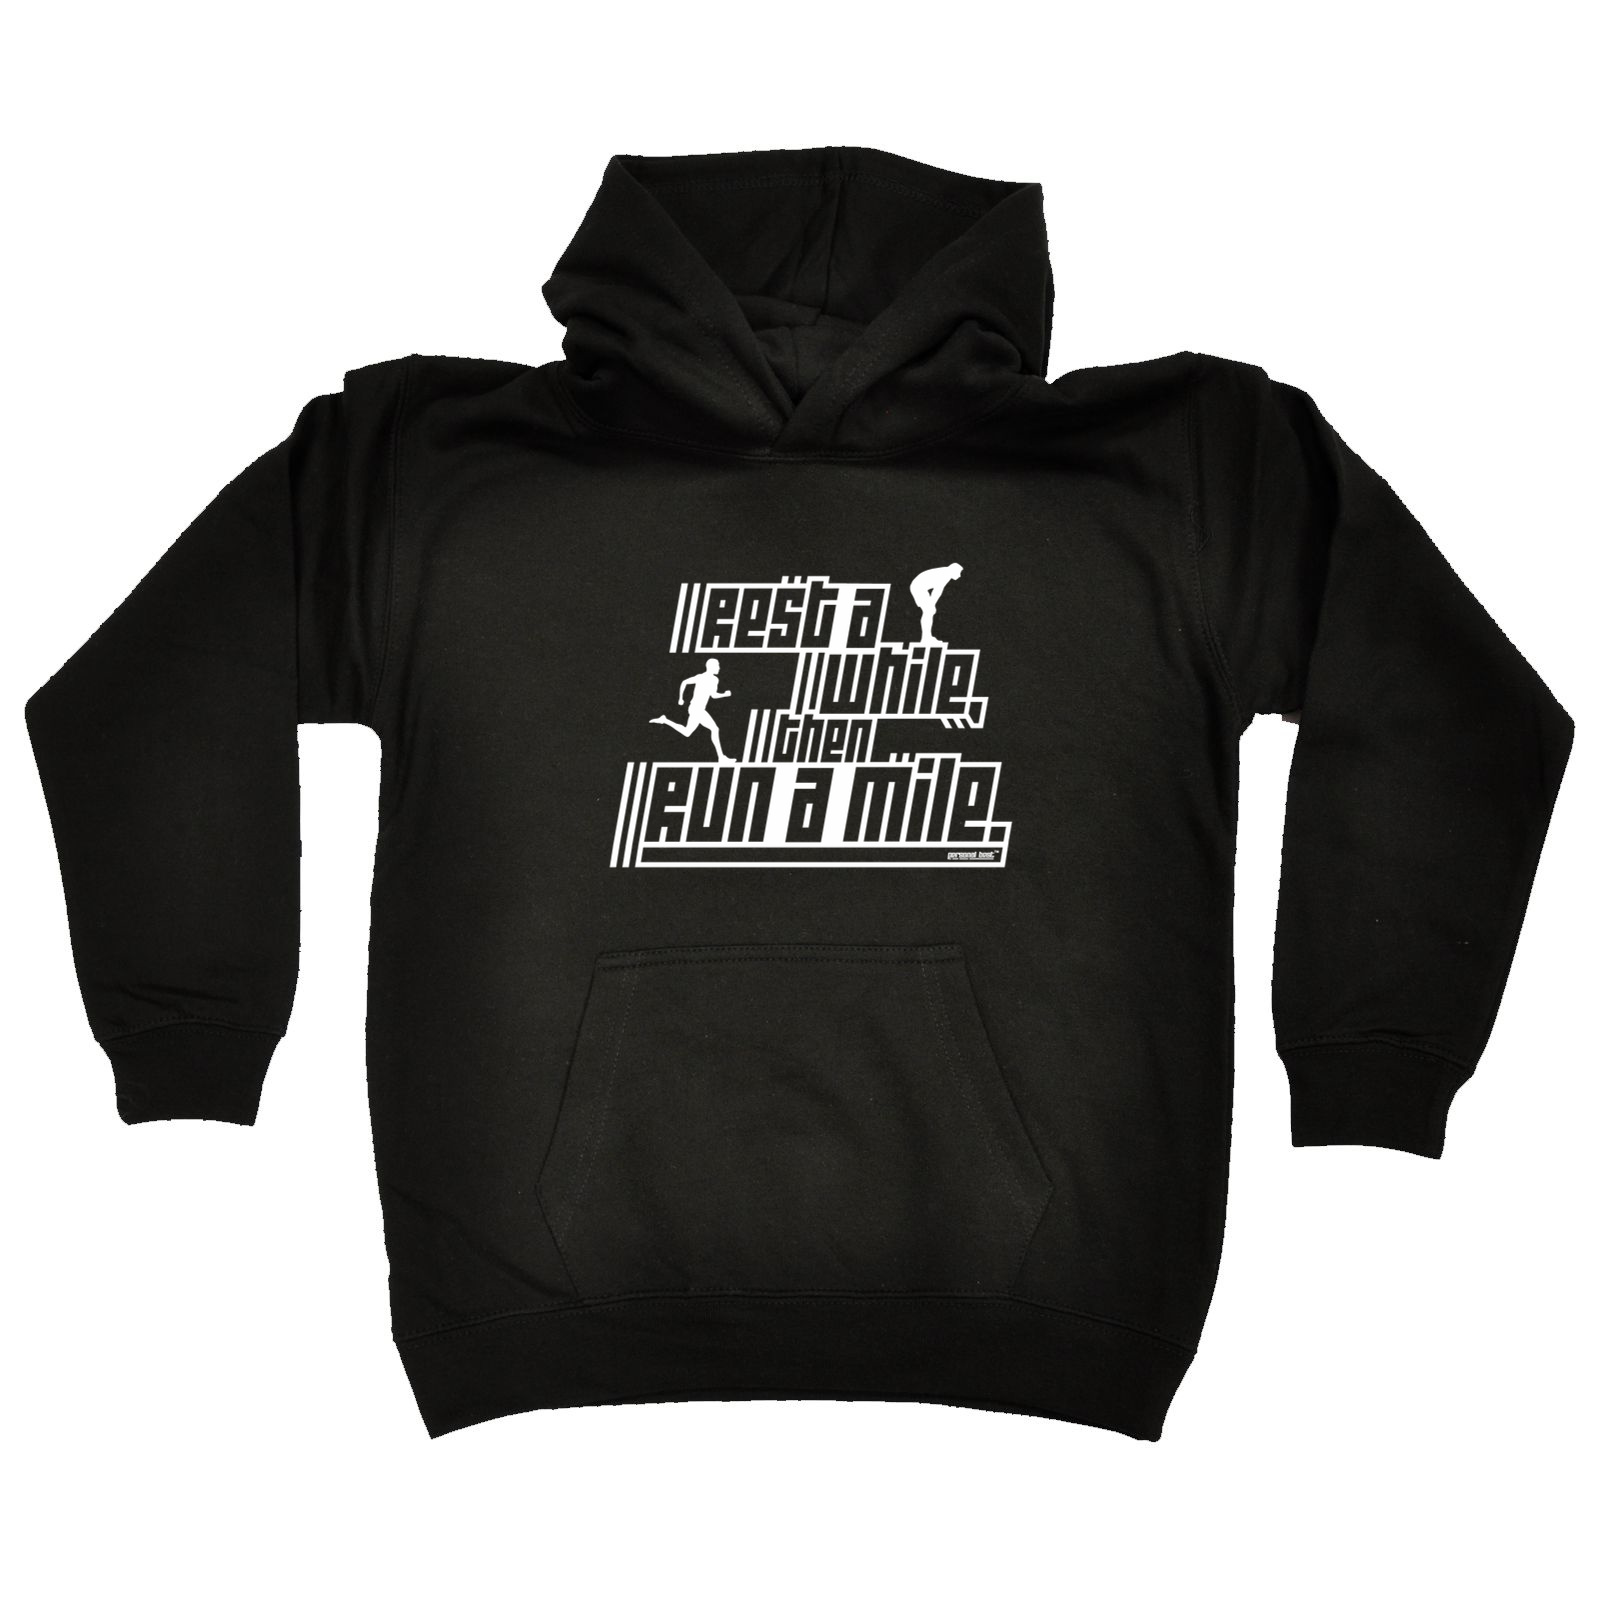 Rest A While Then Run A Mile Running - Funny Novelty Kids Children Hoodie - Picture 1 of 1